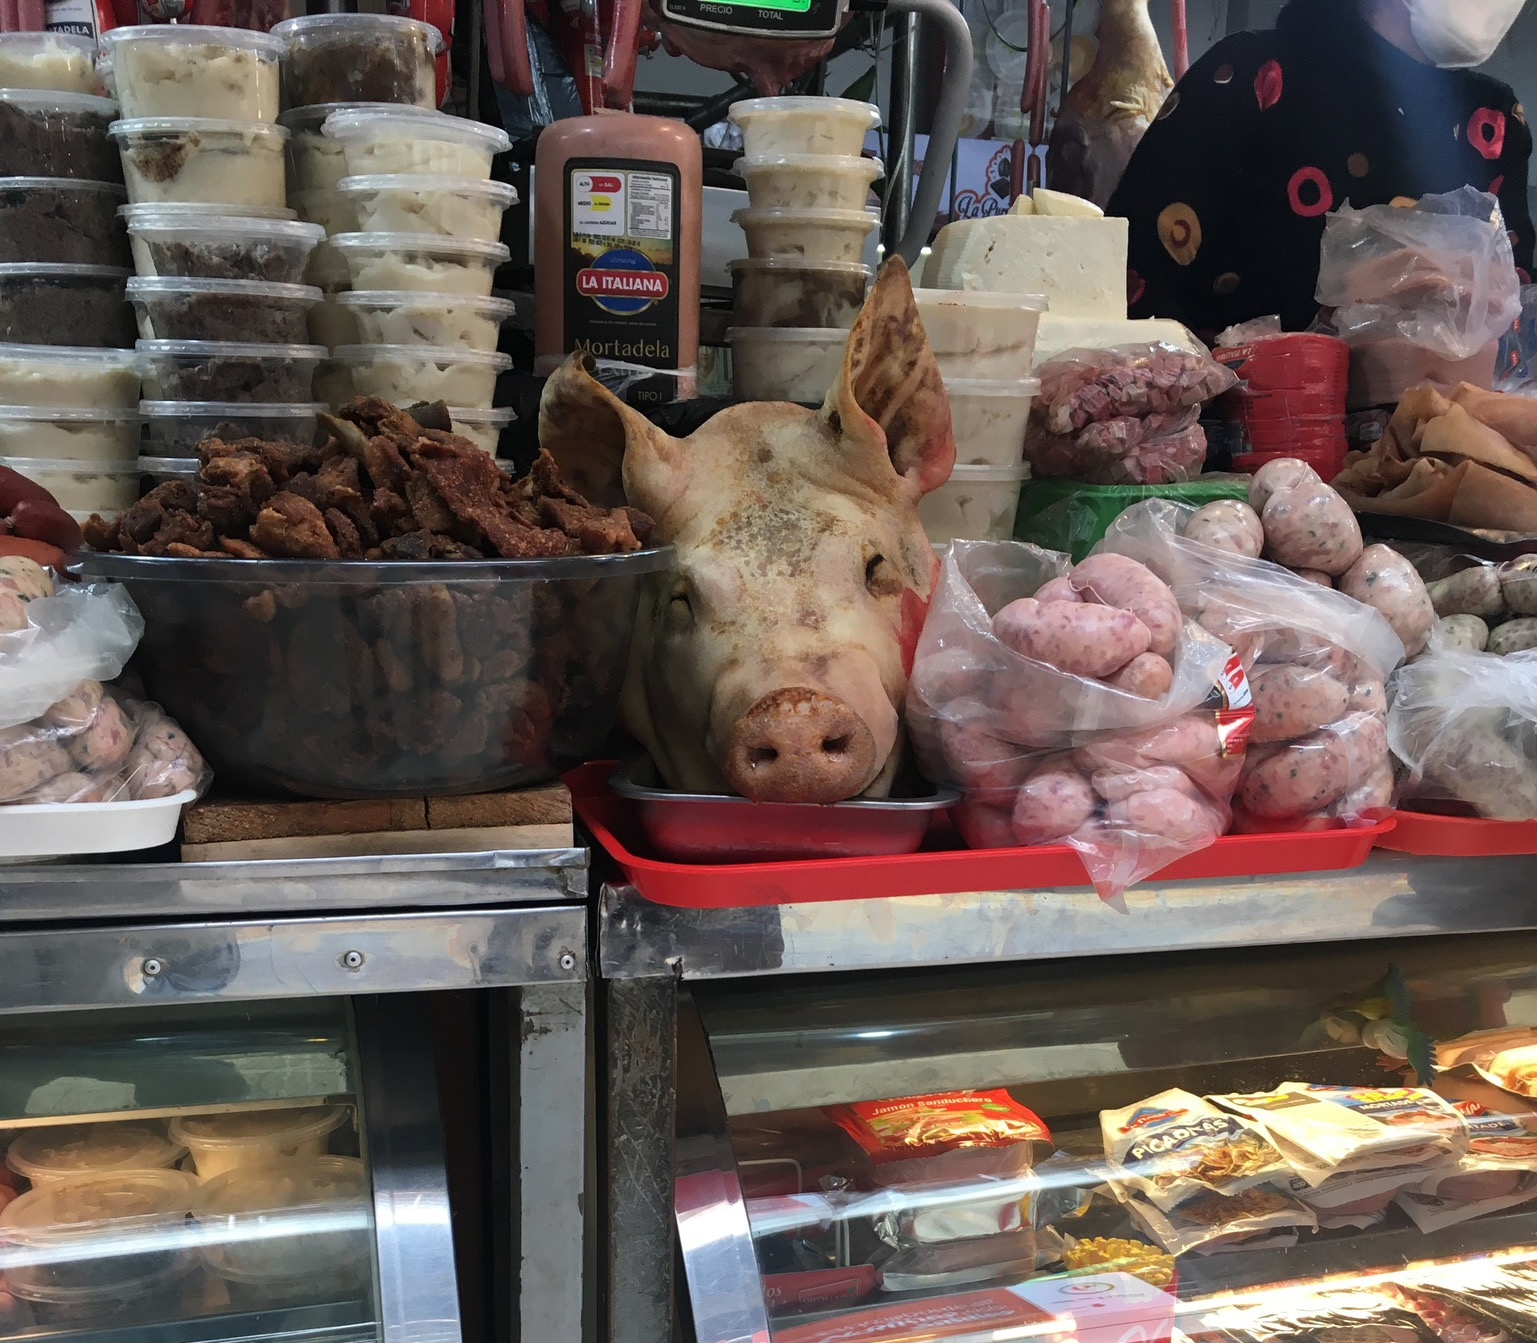 photo of cuts of meat on a counter, including a pig's head